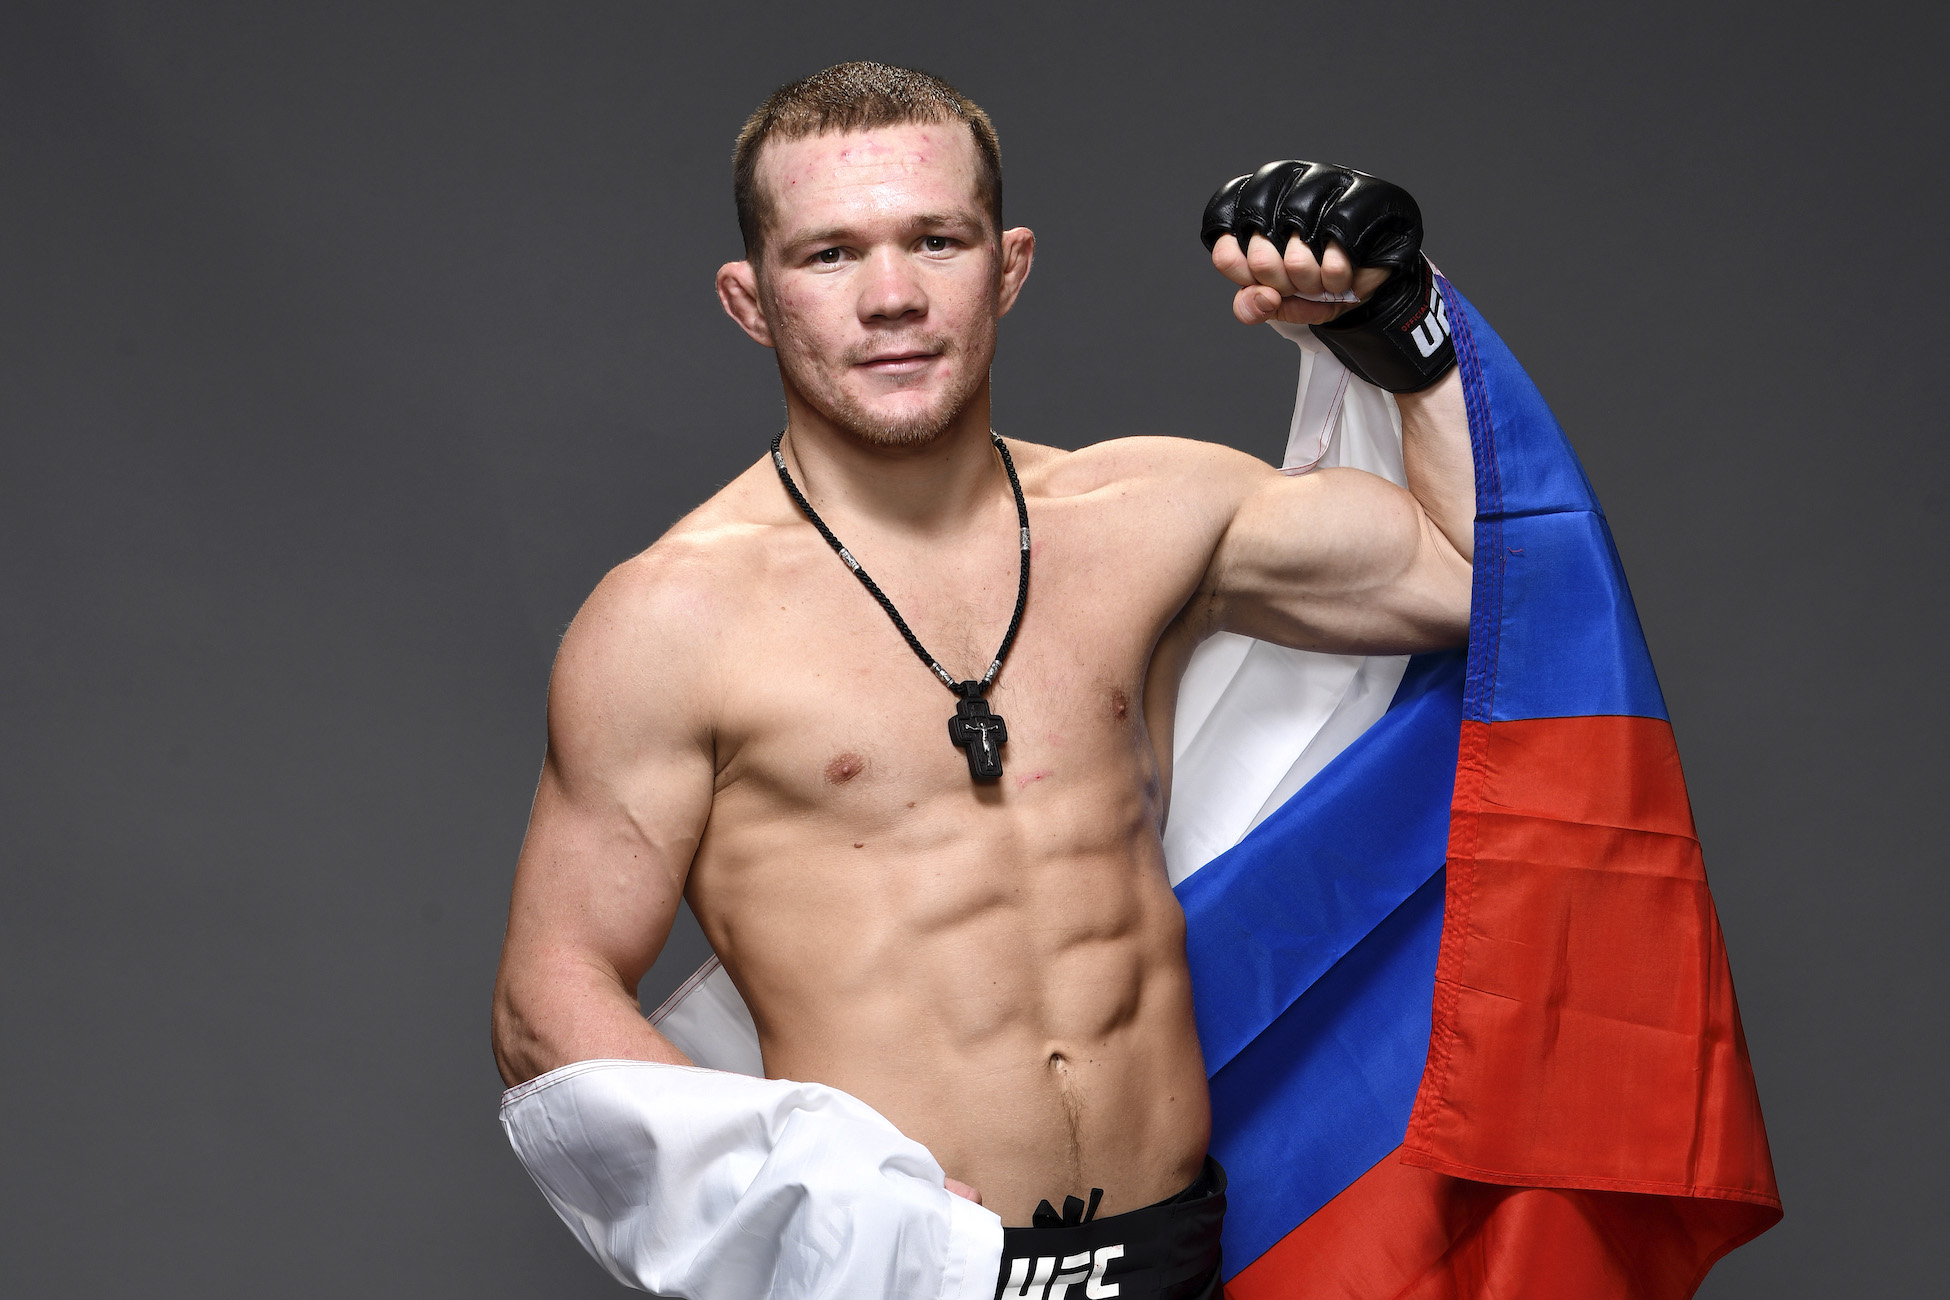 Petr Yan constantly got in trouble as a child for starting fights on the street and in school, but it's helped him thrive in the UFC.